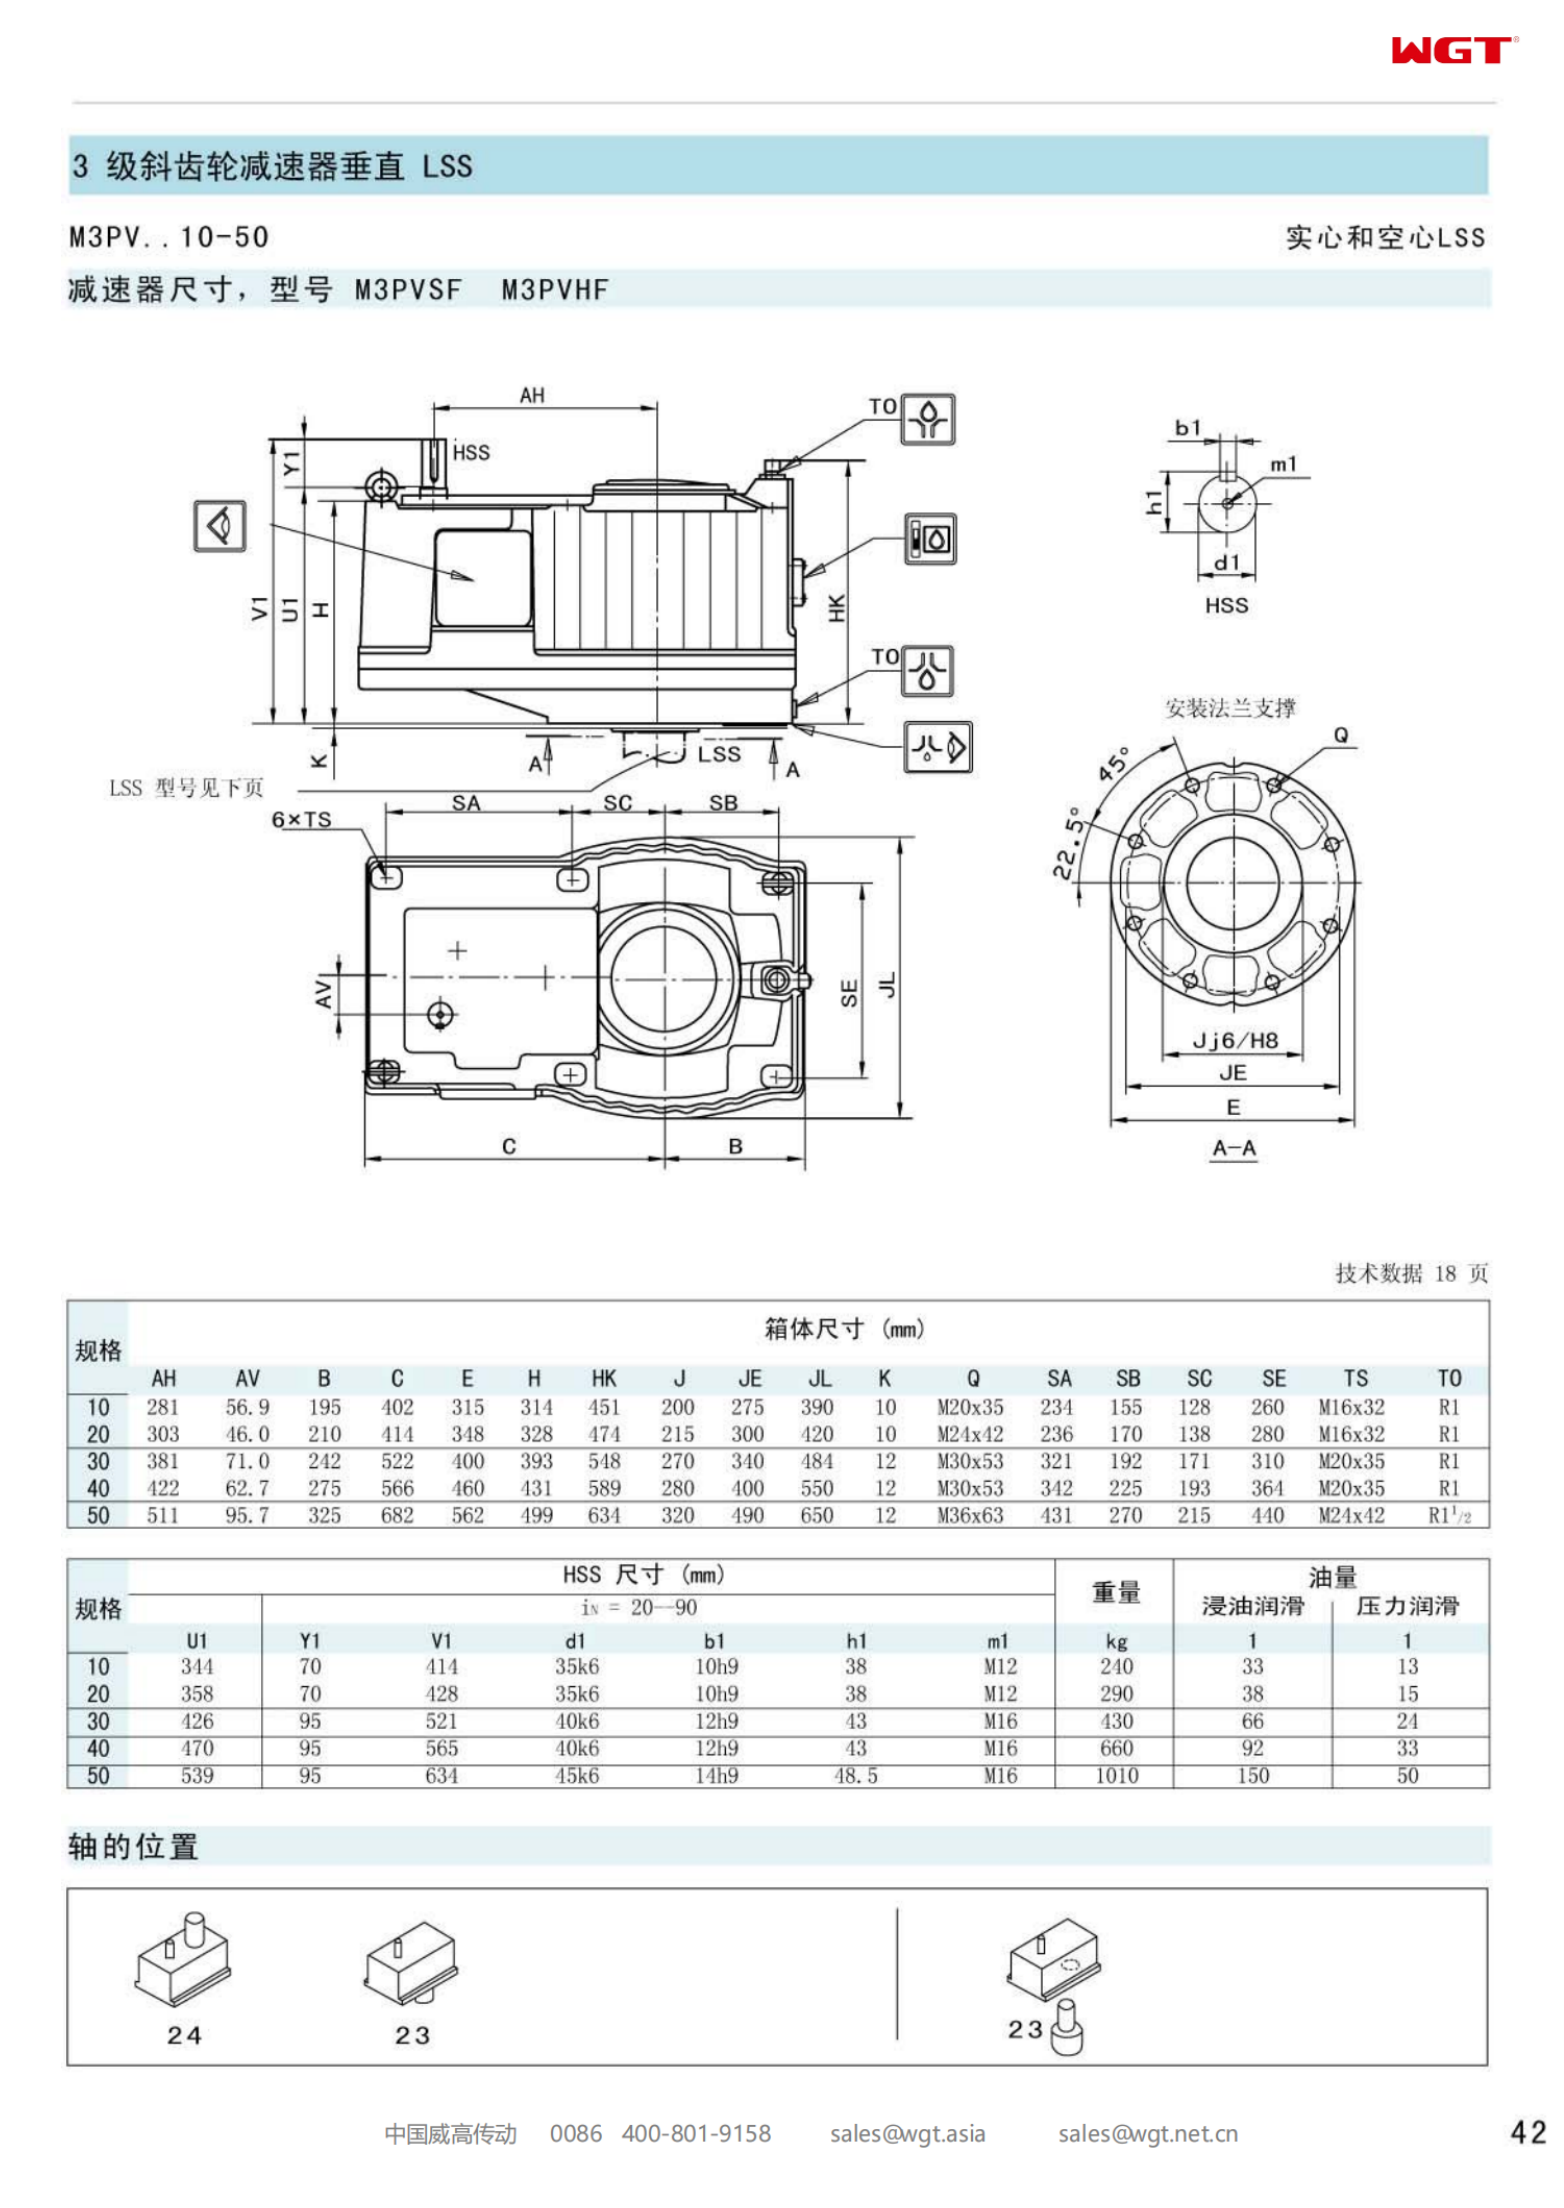 M3PVHF10 Replace_SEW_M_Series Gearbox